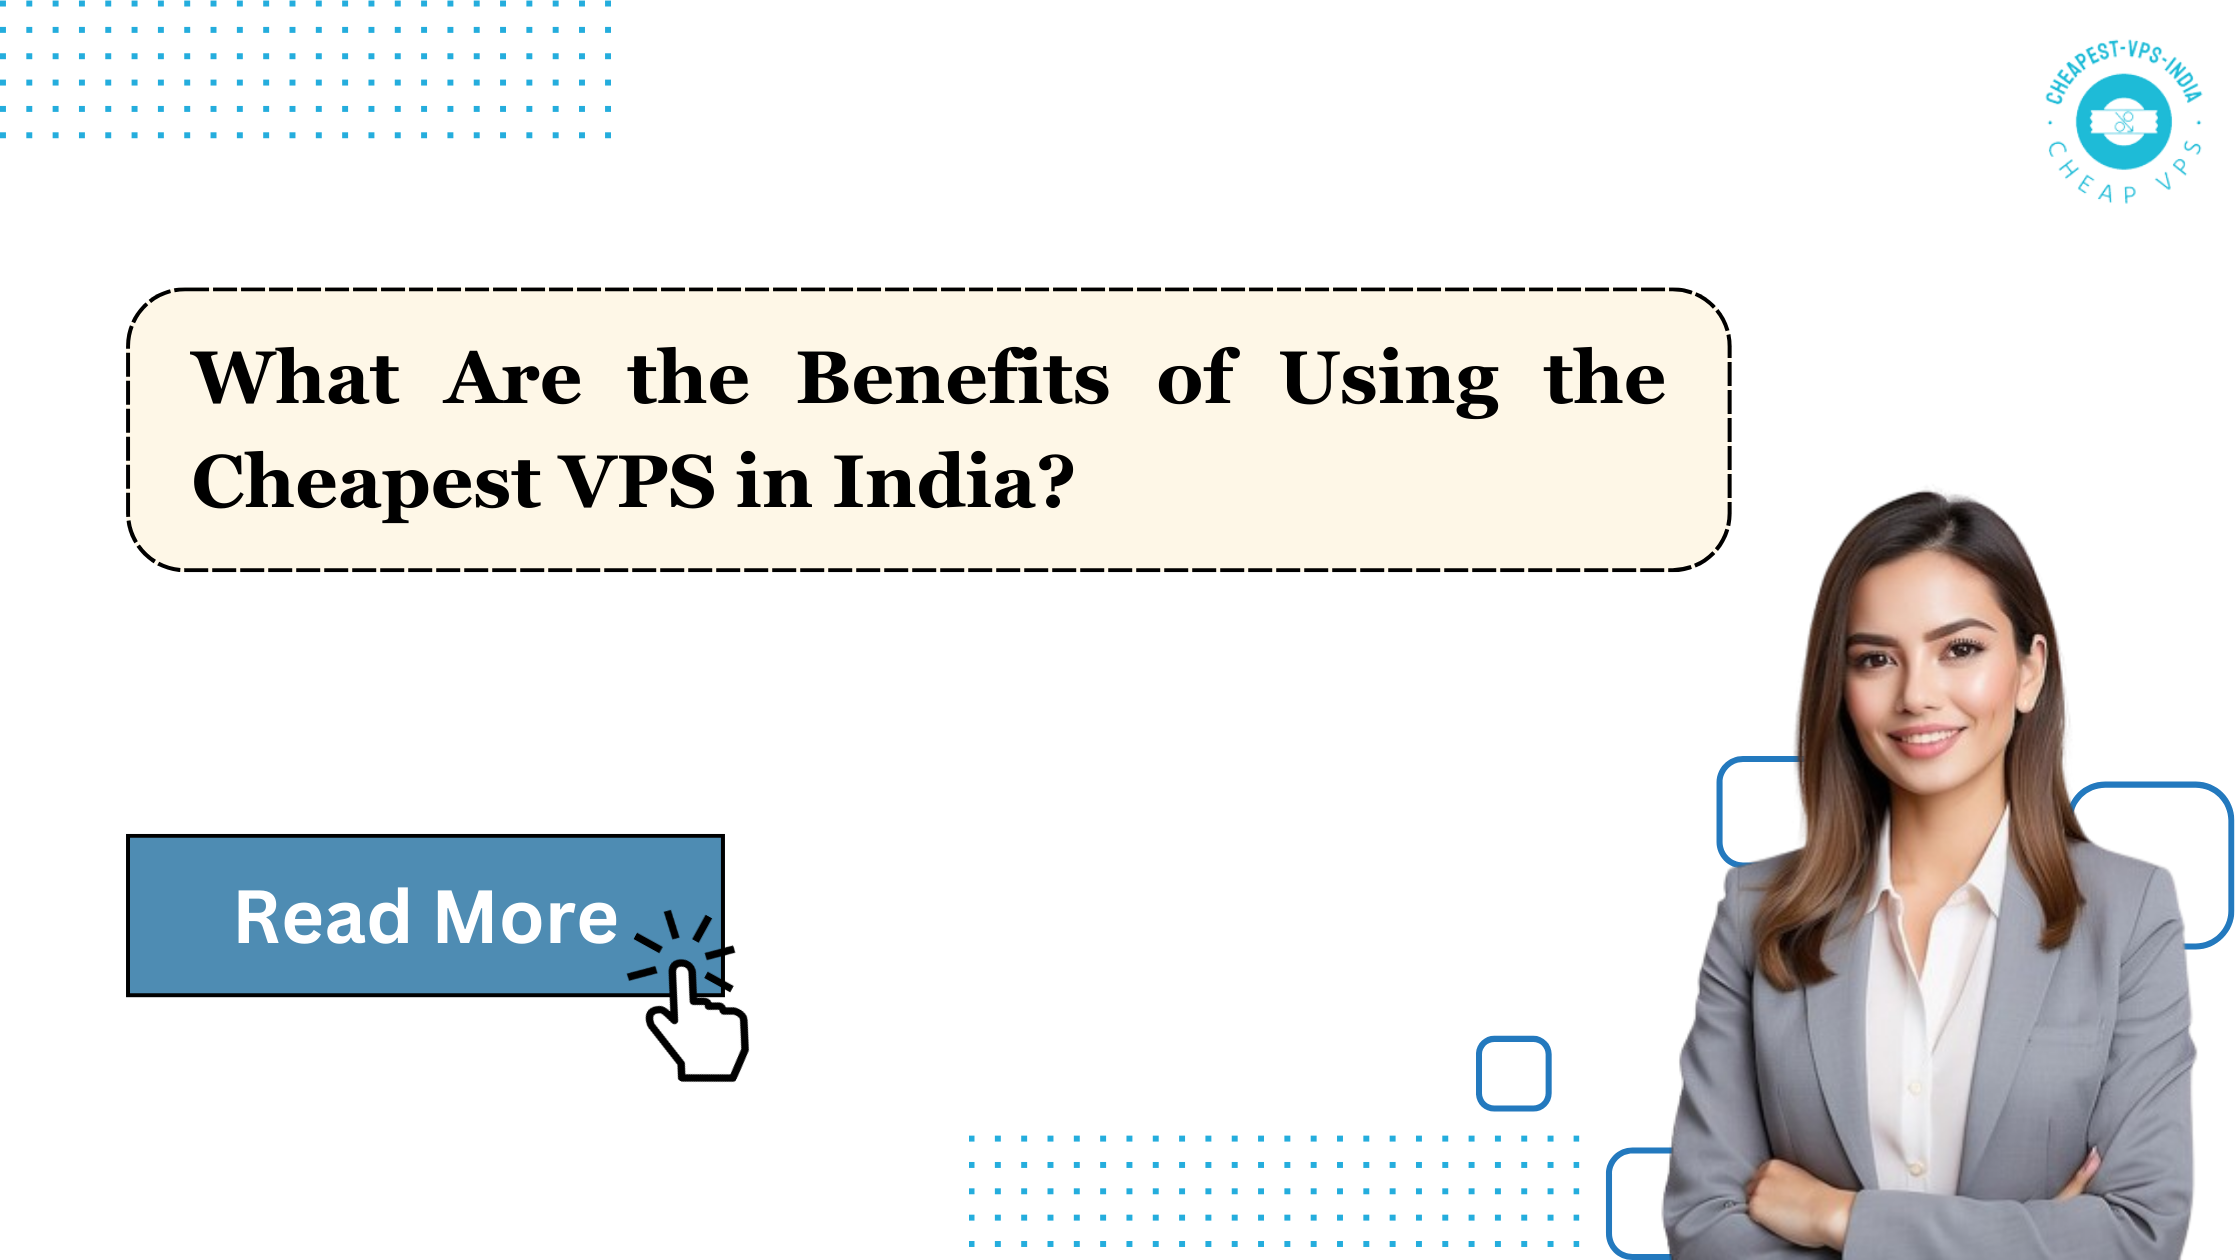 What Are the Benefits of Using the Cheapest VPS in India?